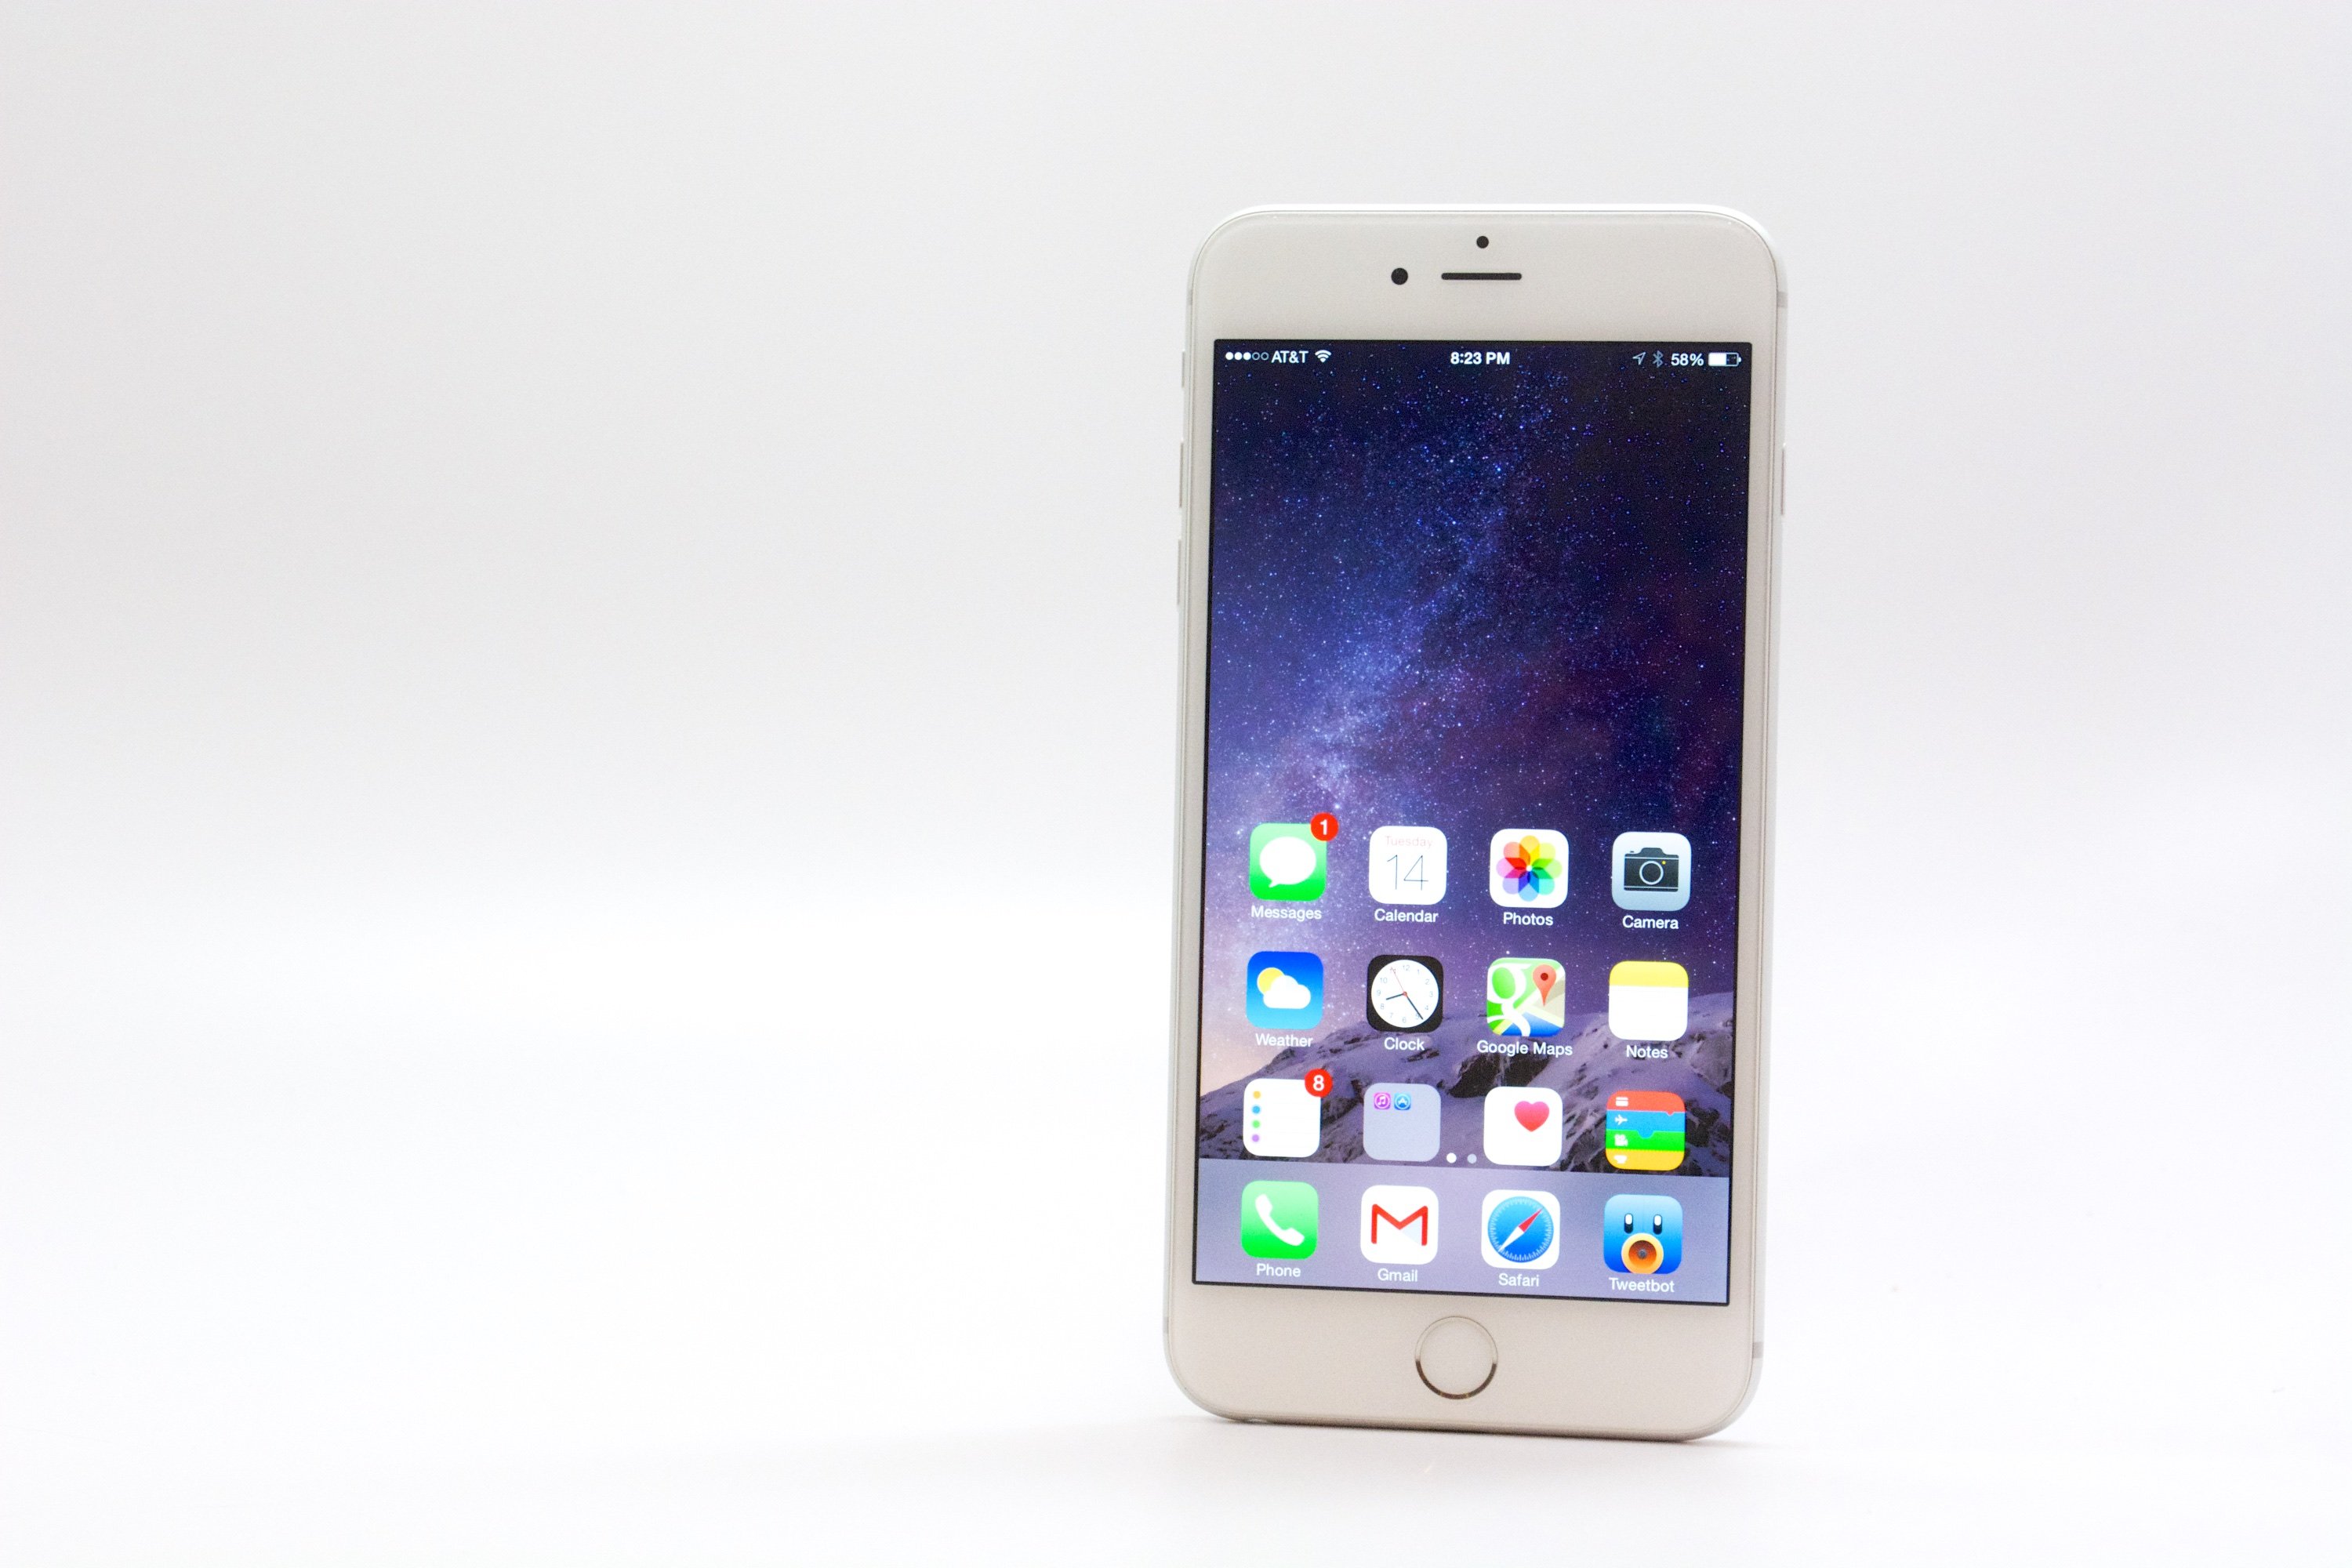 Overall iOS 8.1.1 connectivity is solid on the iPhone 6 Plus.